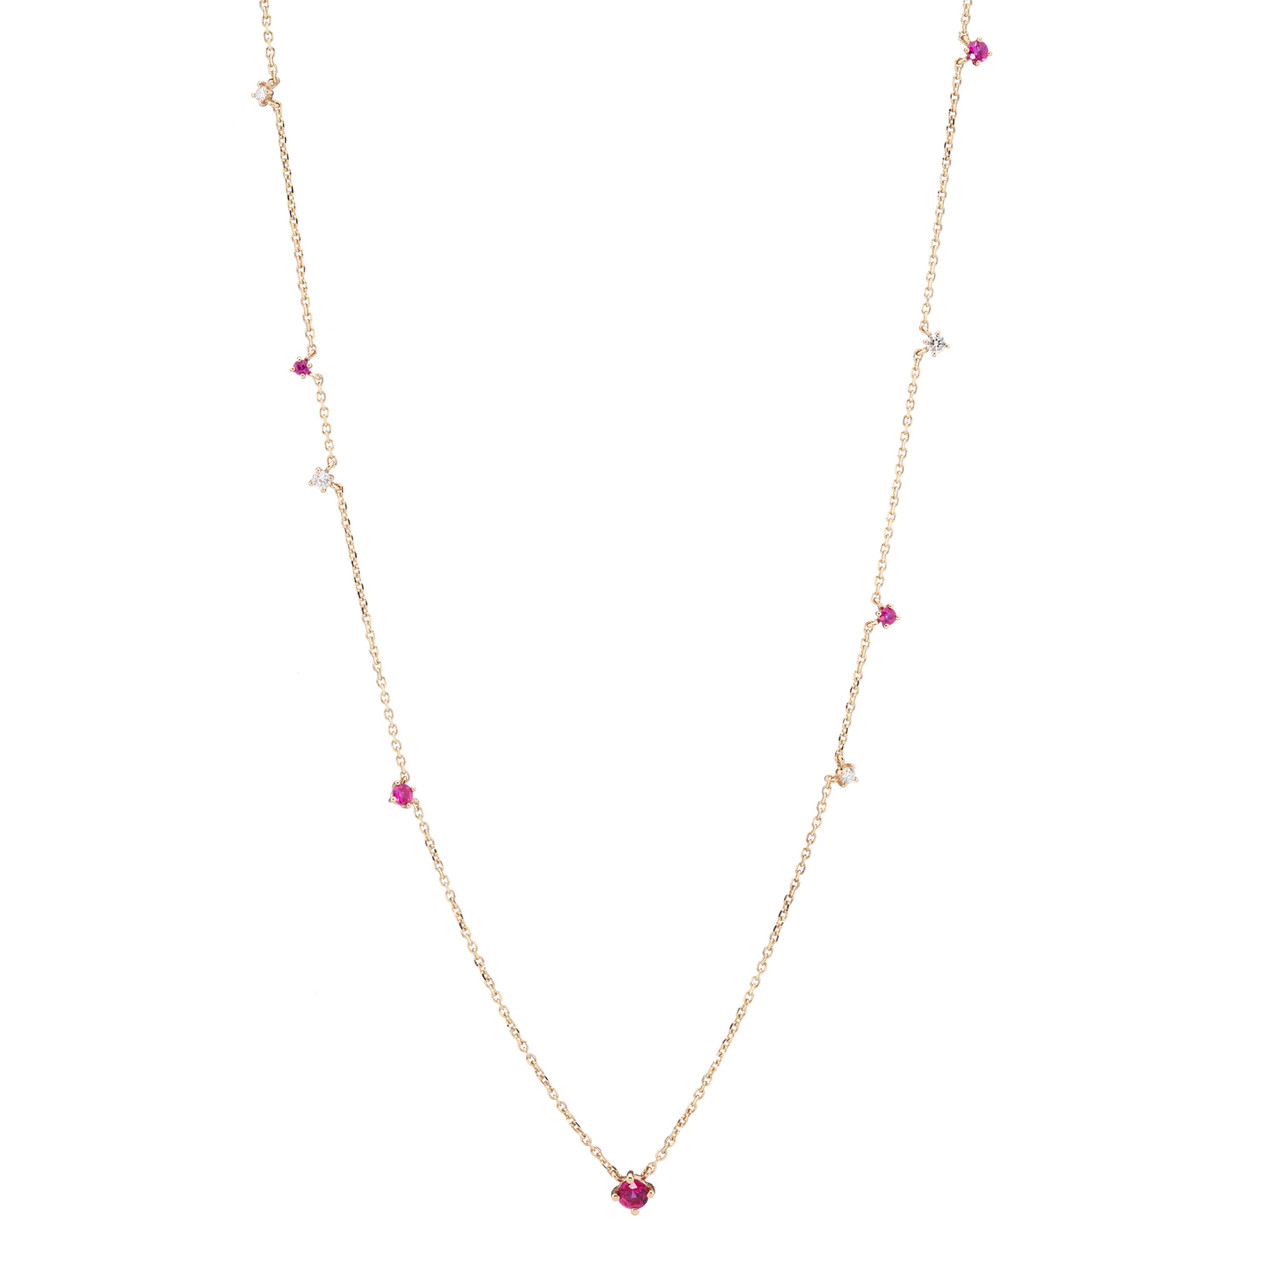 Scatter Diamond & Ruby Necklace, tf House - Infinite, tomfoolery